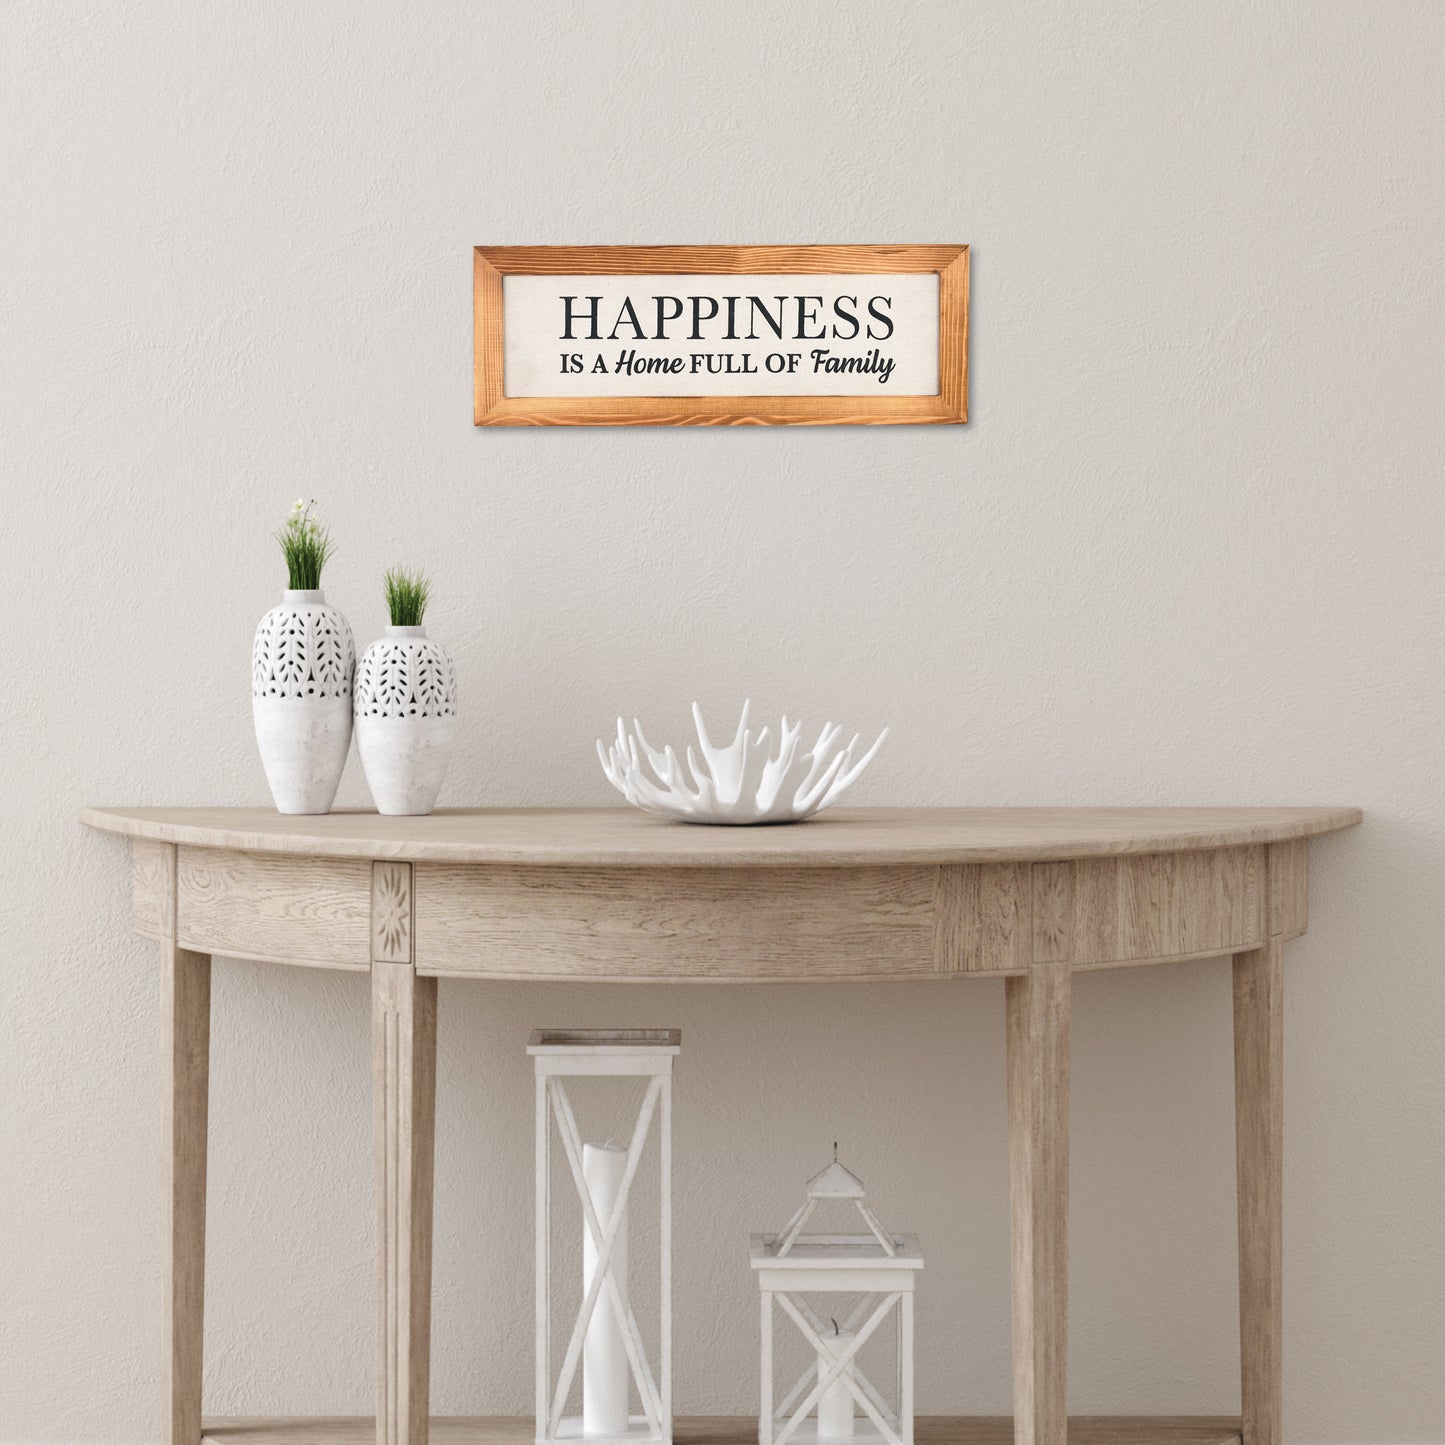 Happiness is a Home Full of Family - 16" x 6" Canvas Sign